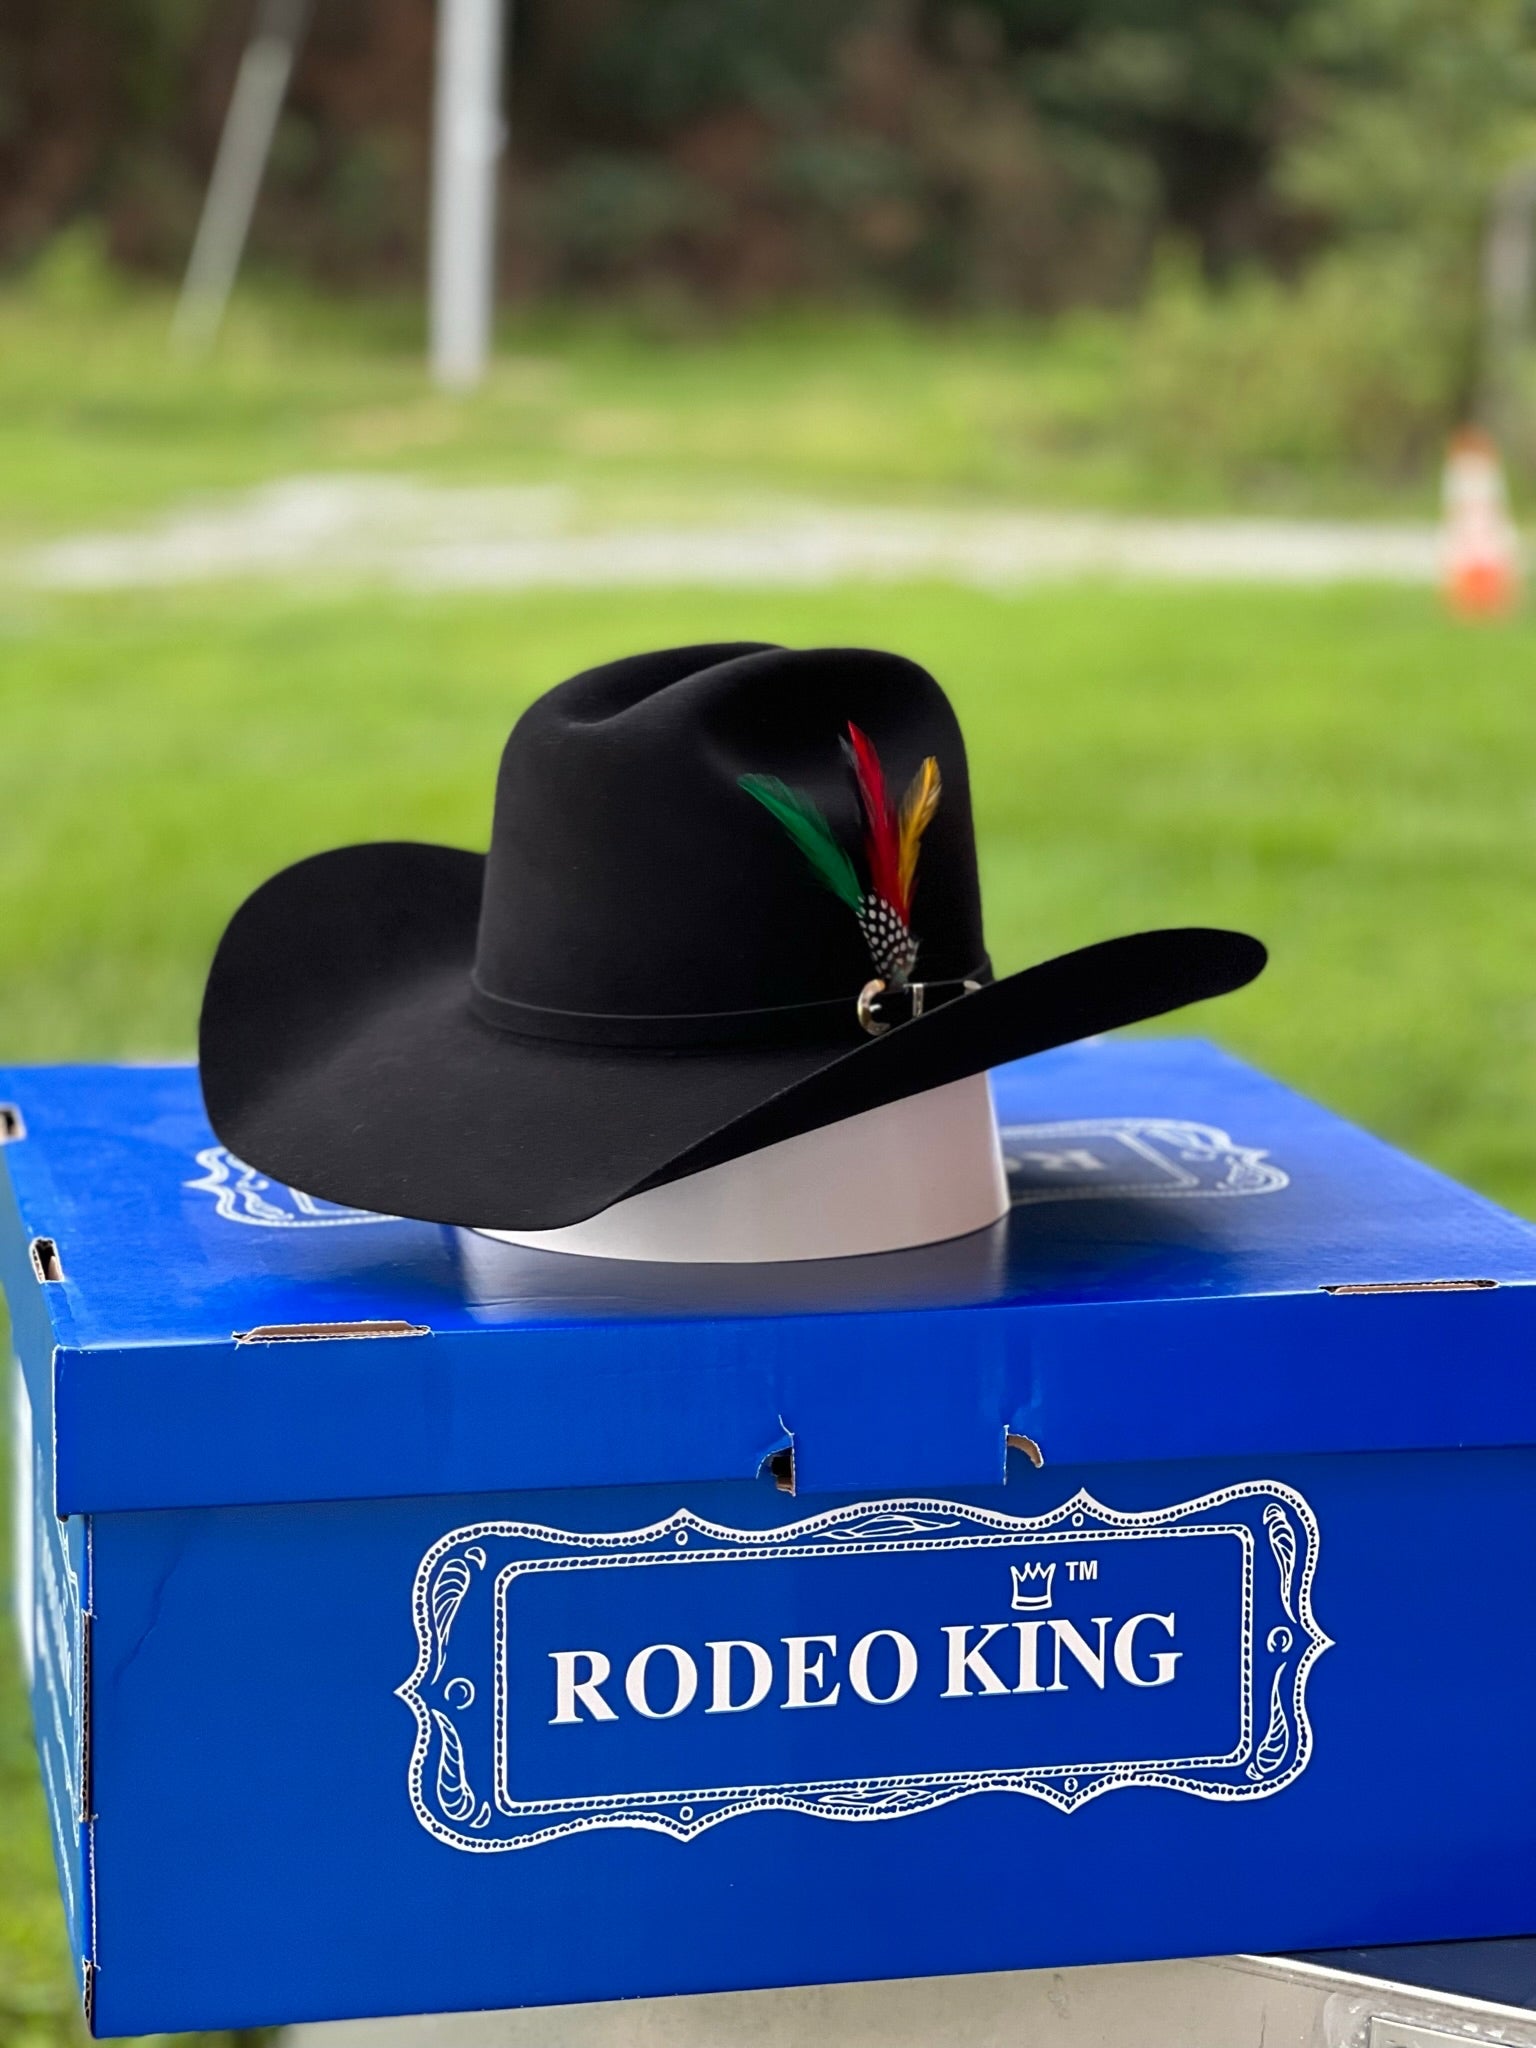 RODEO KING HATS